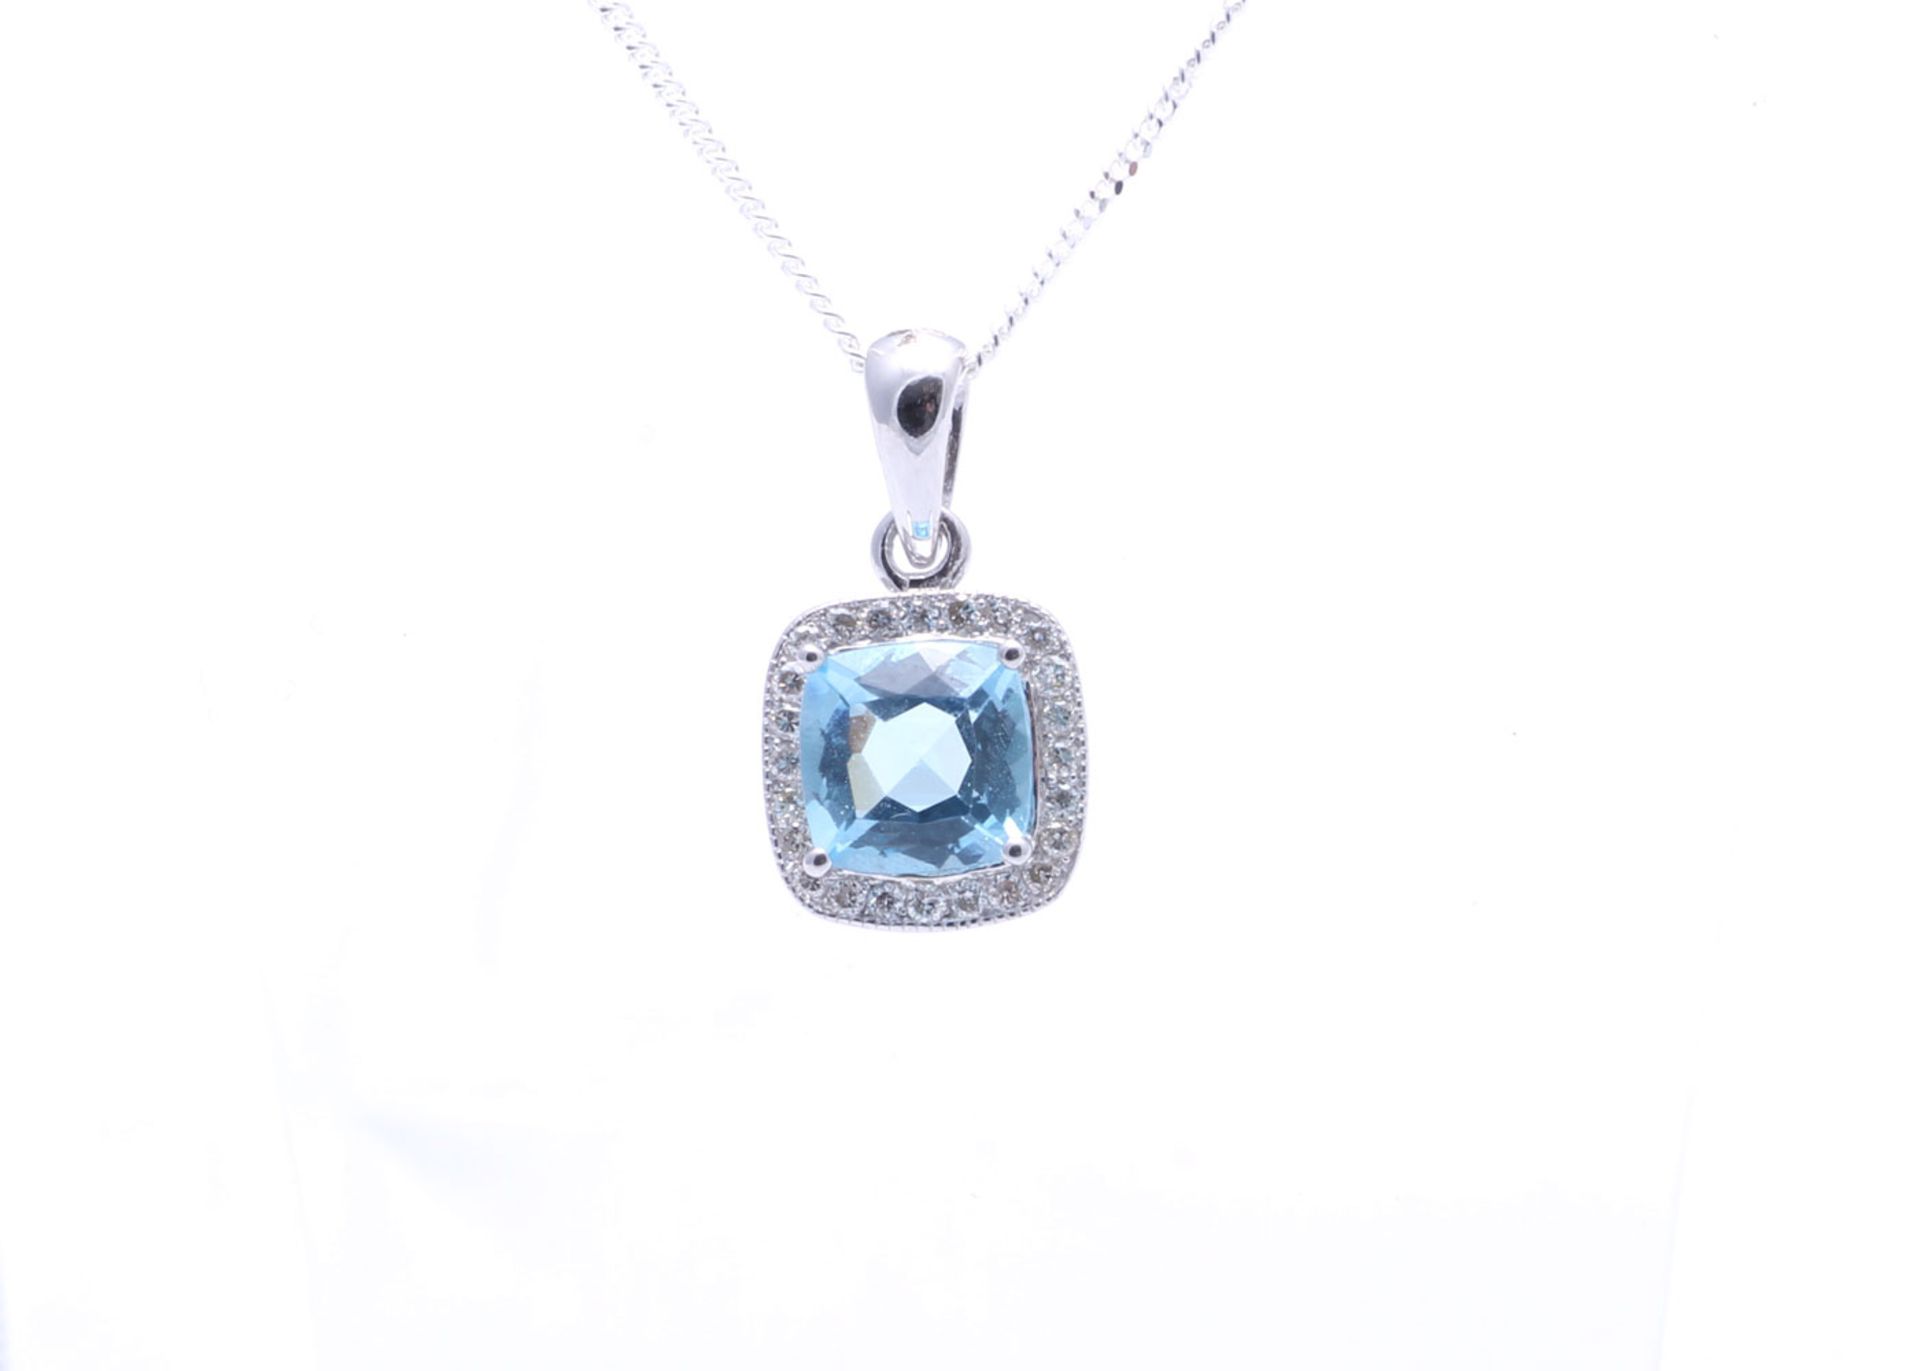 9ct White Gold Blue Topaz And Diamond Pendant 0.12 Carats - Valued by GIE £1,520.00 - 9ct White Gold